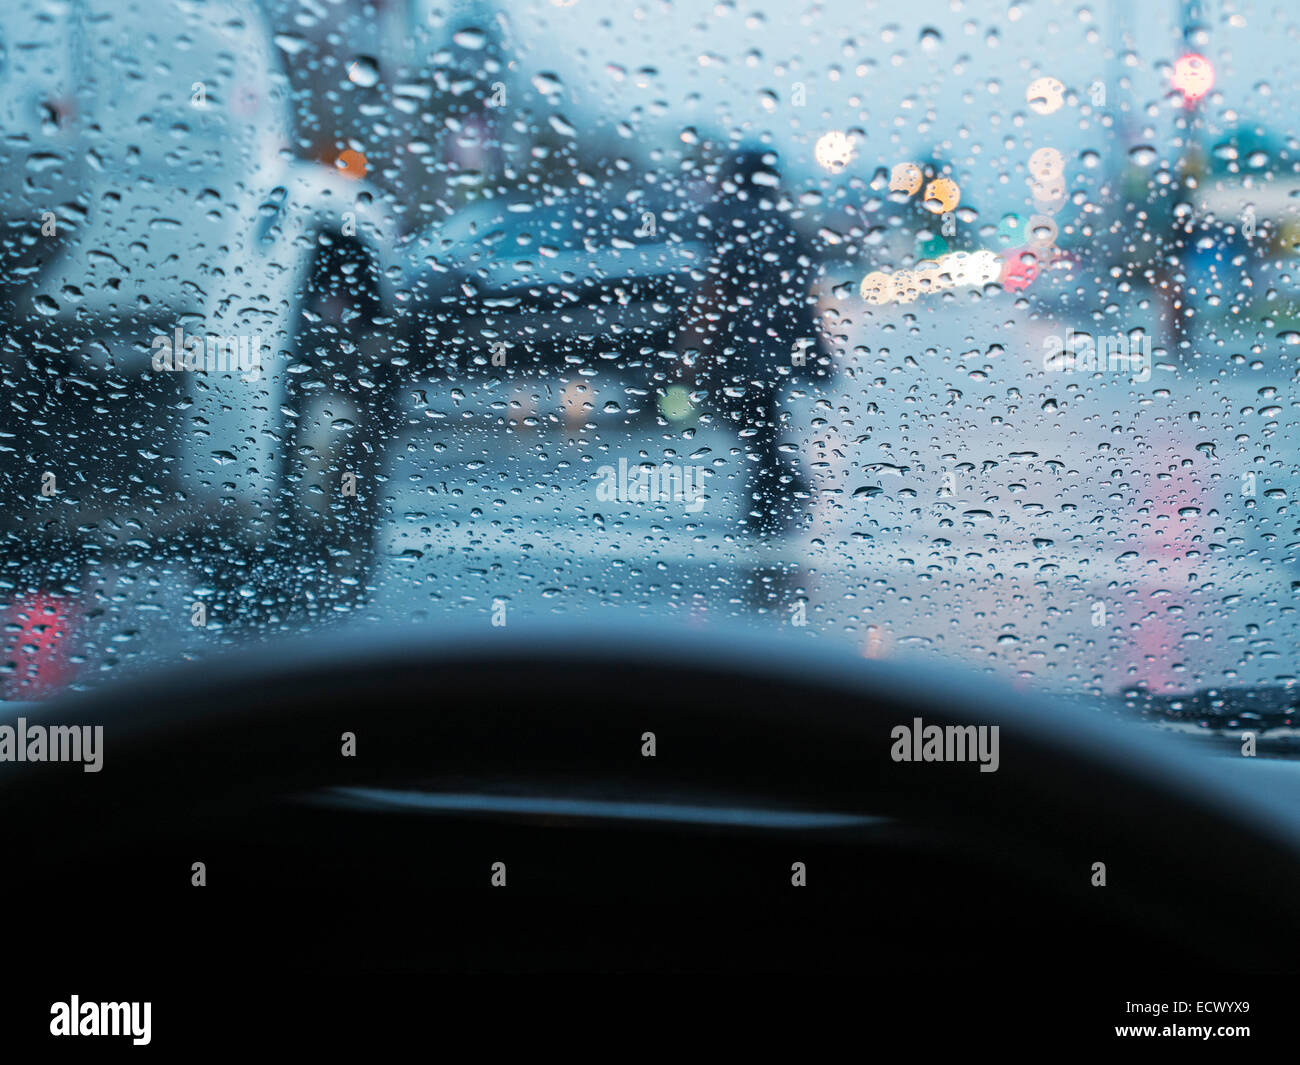 Poor visibility driving conditions in heavy rain; drivers point of view Stock Photo